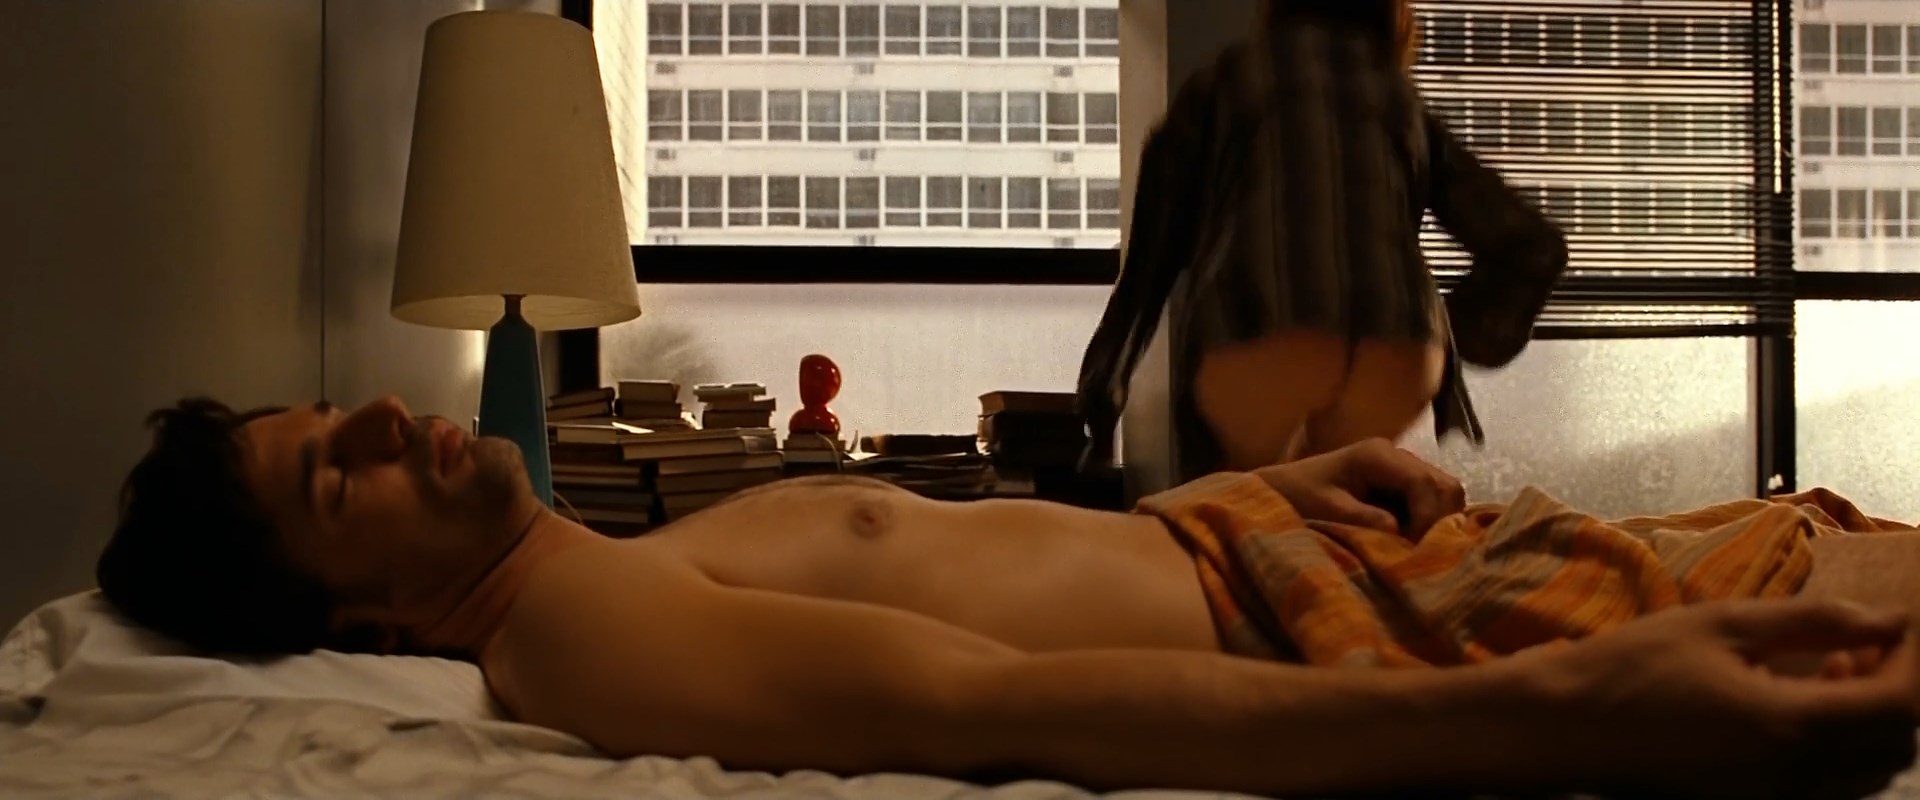 Naked Rachel McAdams in To the Wonder < ANCENSORED